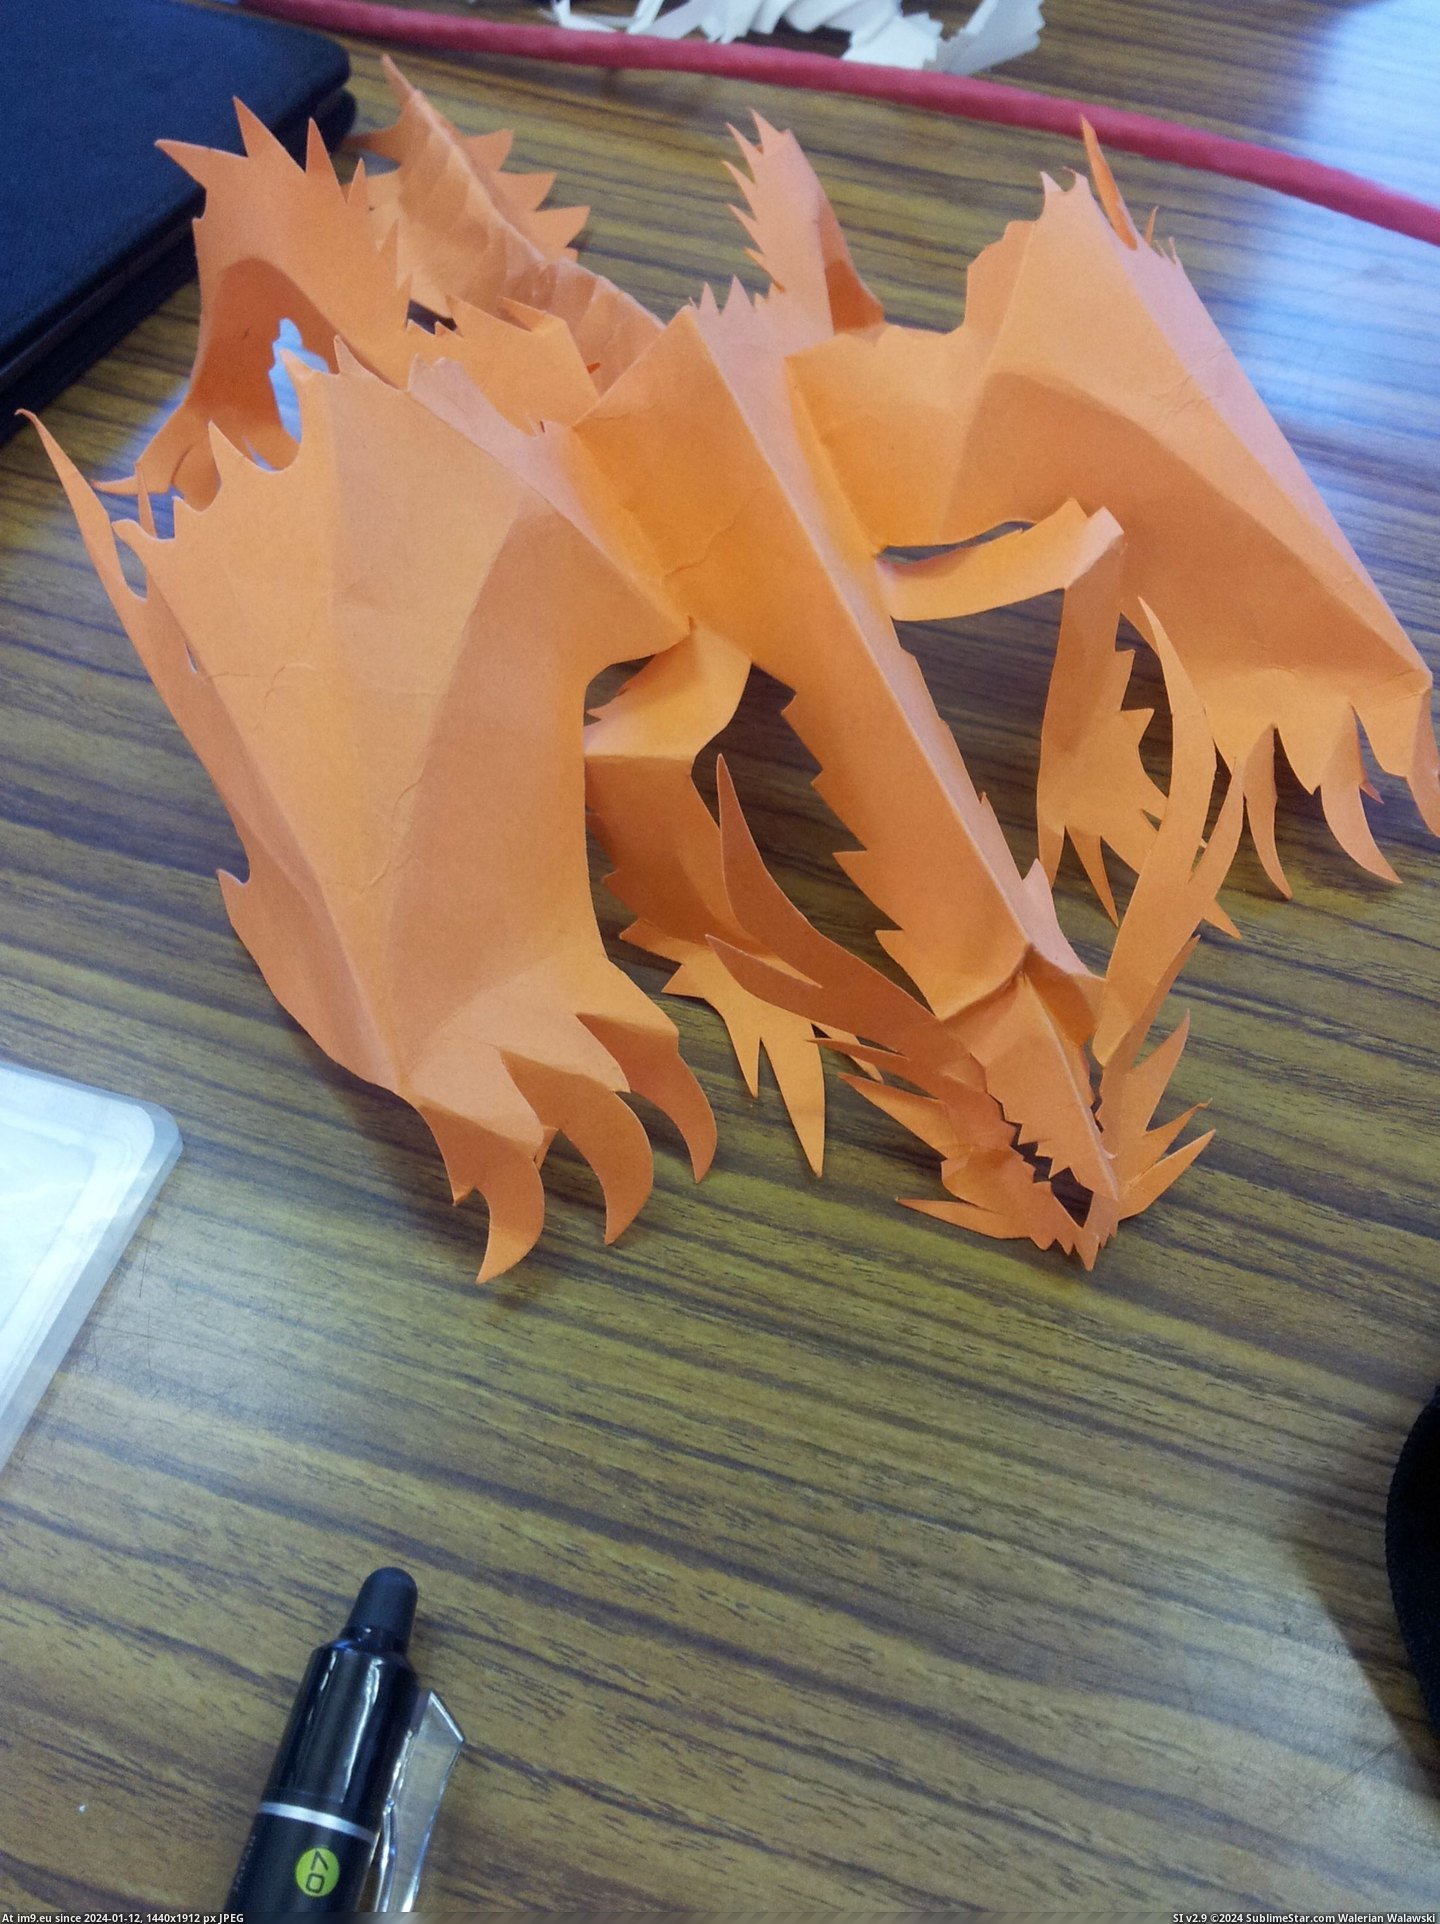 #One #Paper #Students #Creatures #Freehand #Bored #Completely [Pics] One of my students makes these creatures out of paper completely freehand whenever he is bored 10 Pic. (Obraz z album My r/PICS favs))